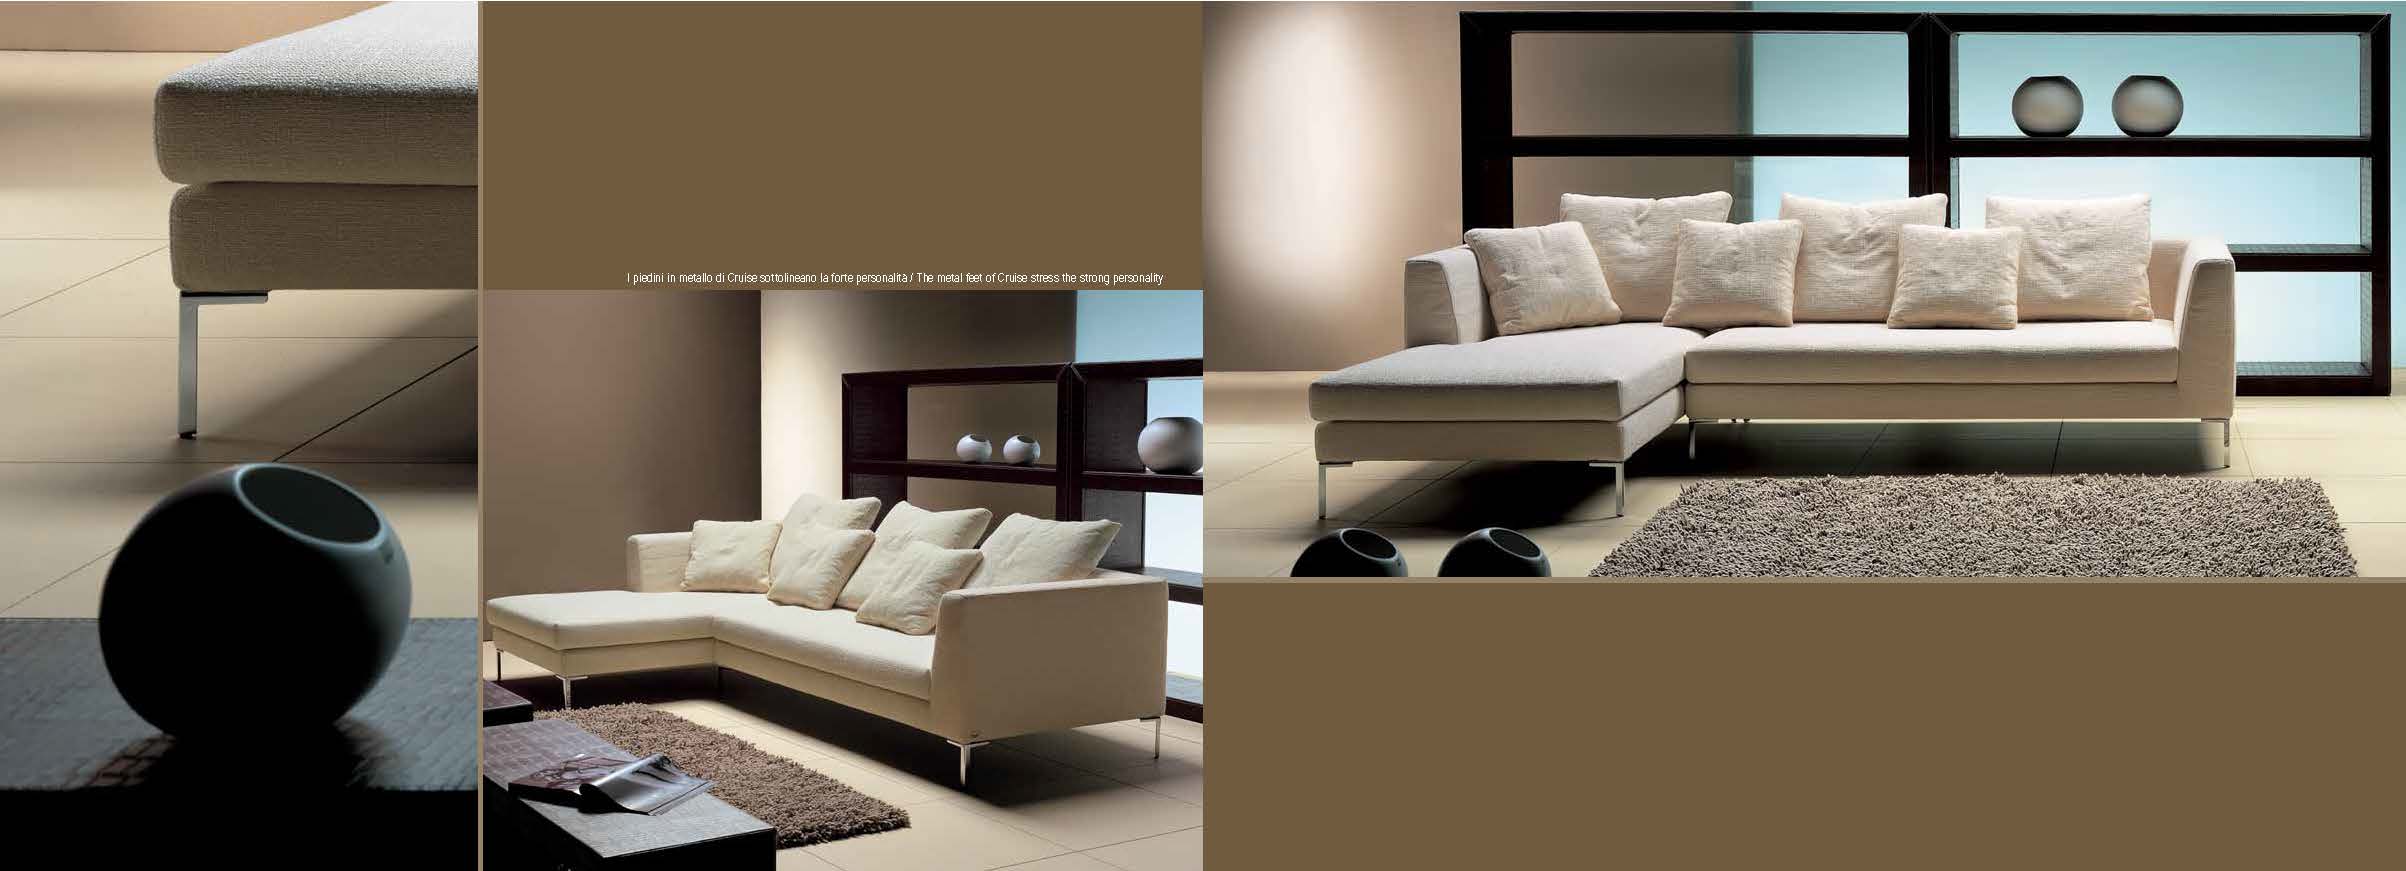 Living Room Furniture Sleepers Sofas Loveseats and Chairs Cruise